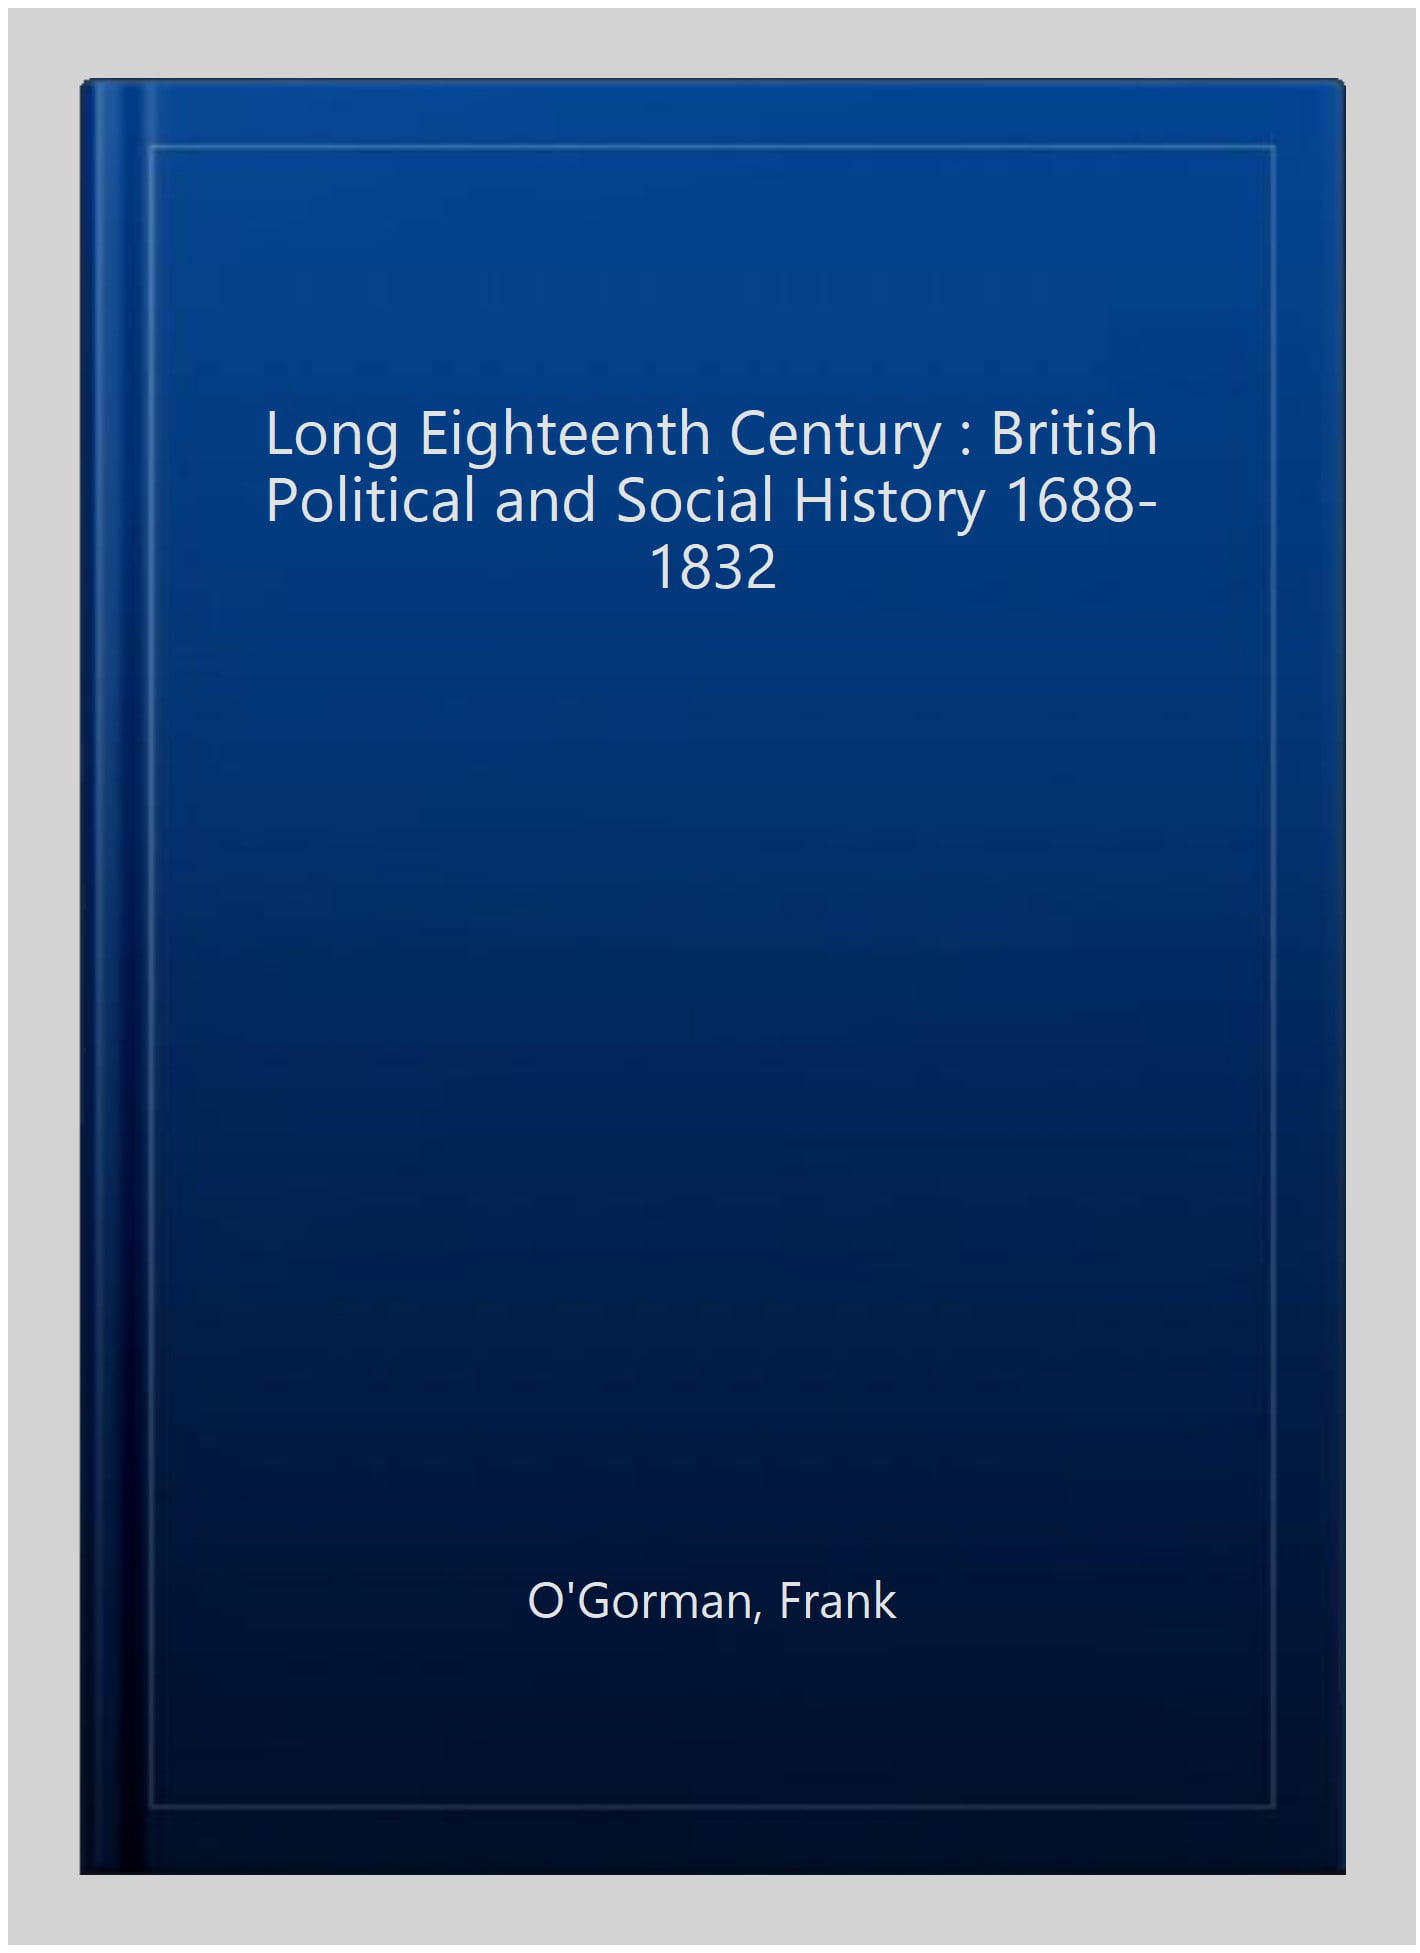 British Political and Social History 1688-1832 The Long Eighteenth Century 